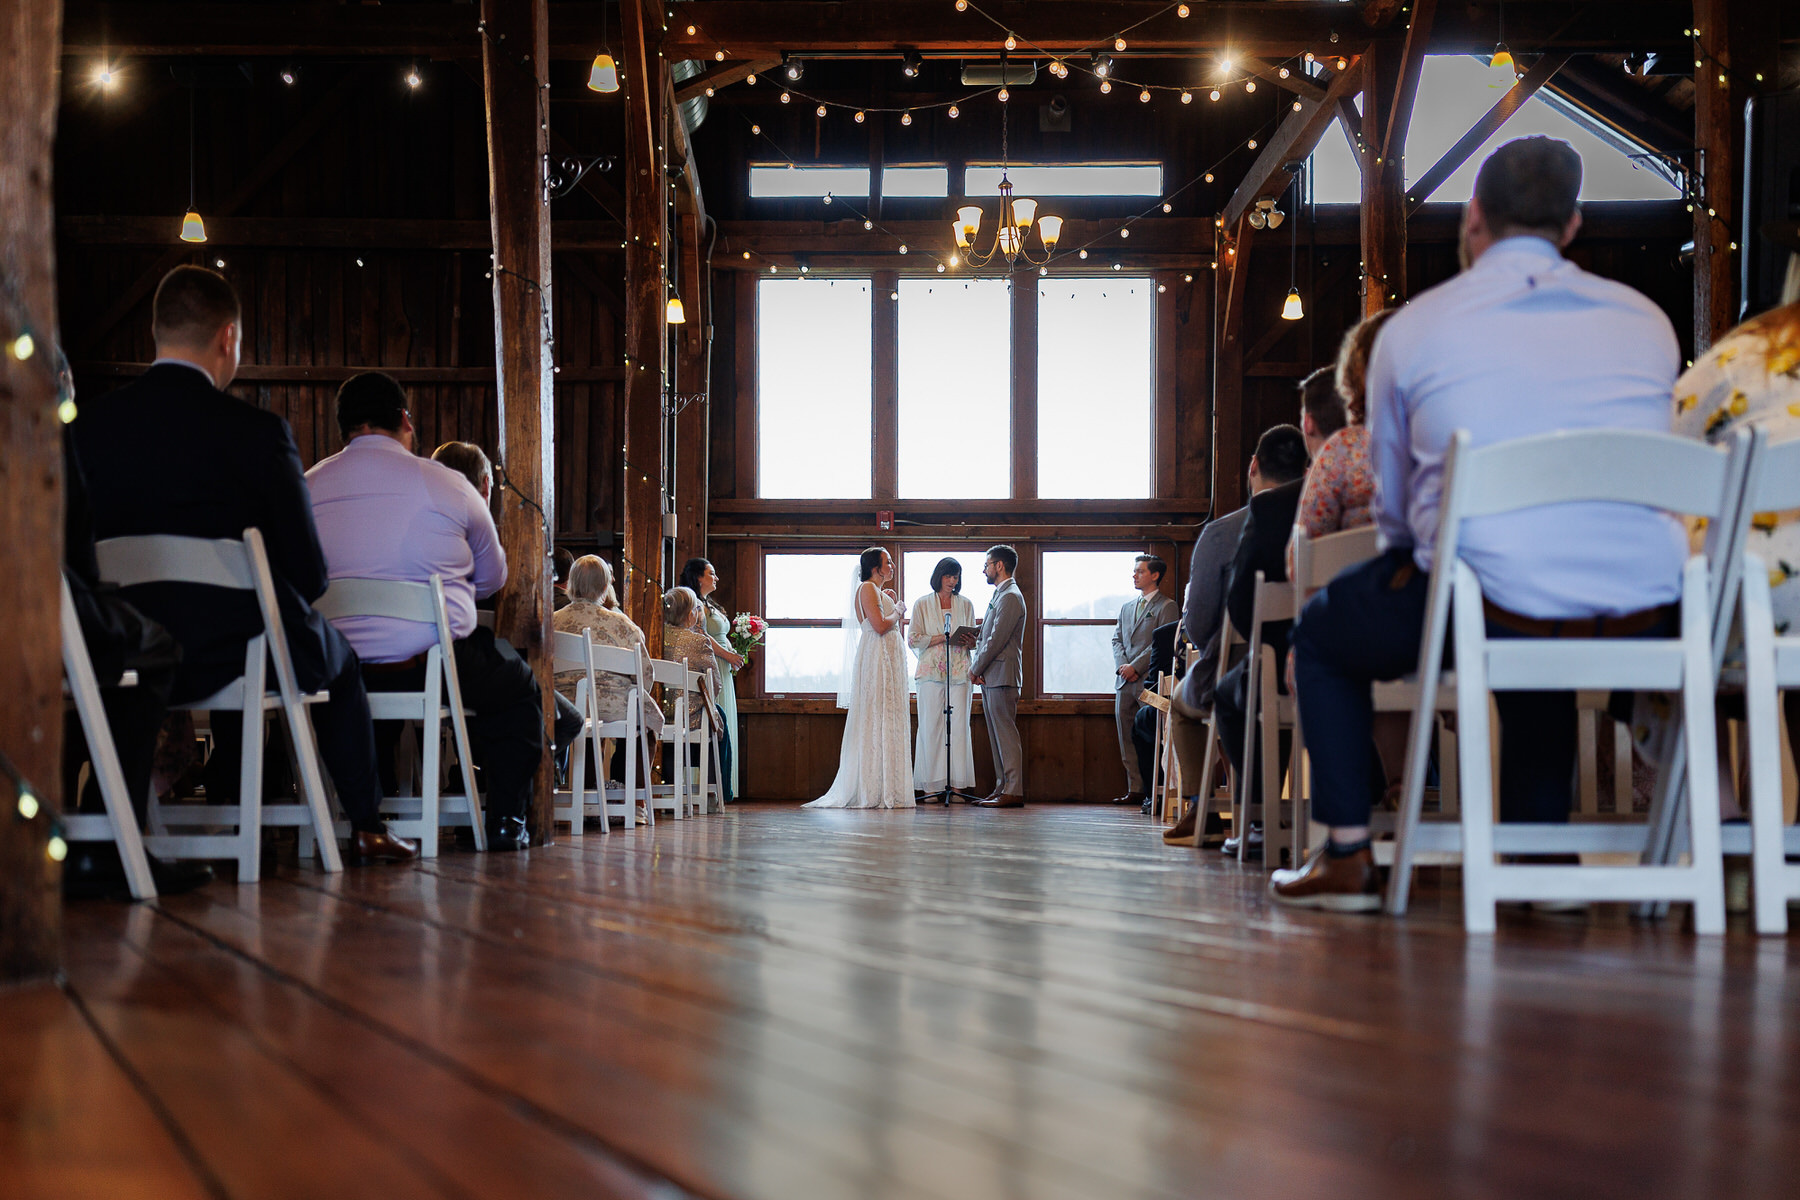 Indoor wedding ceremony at the Red barn